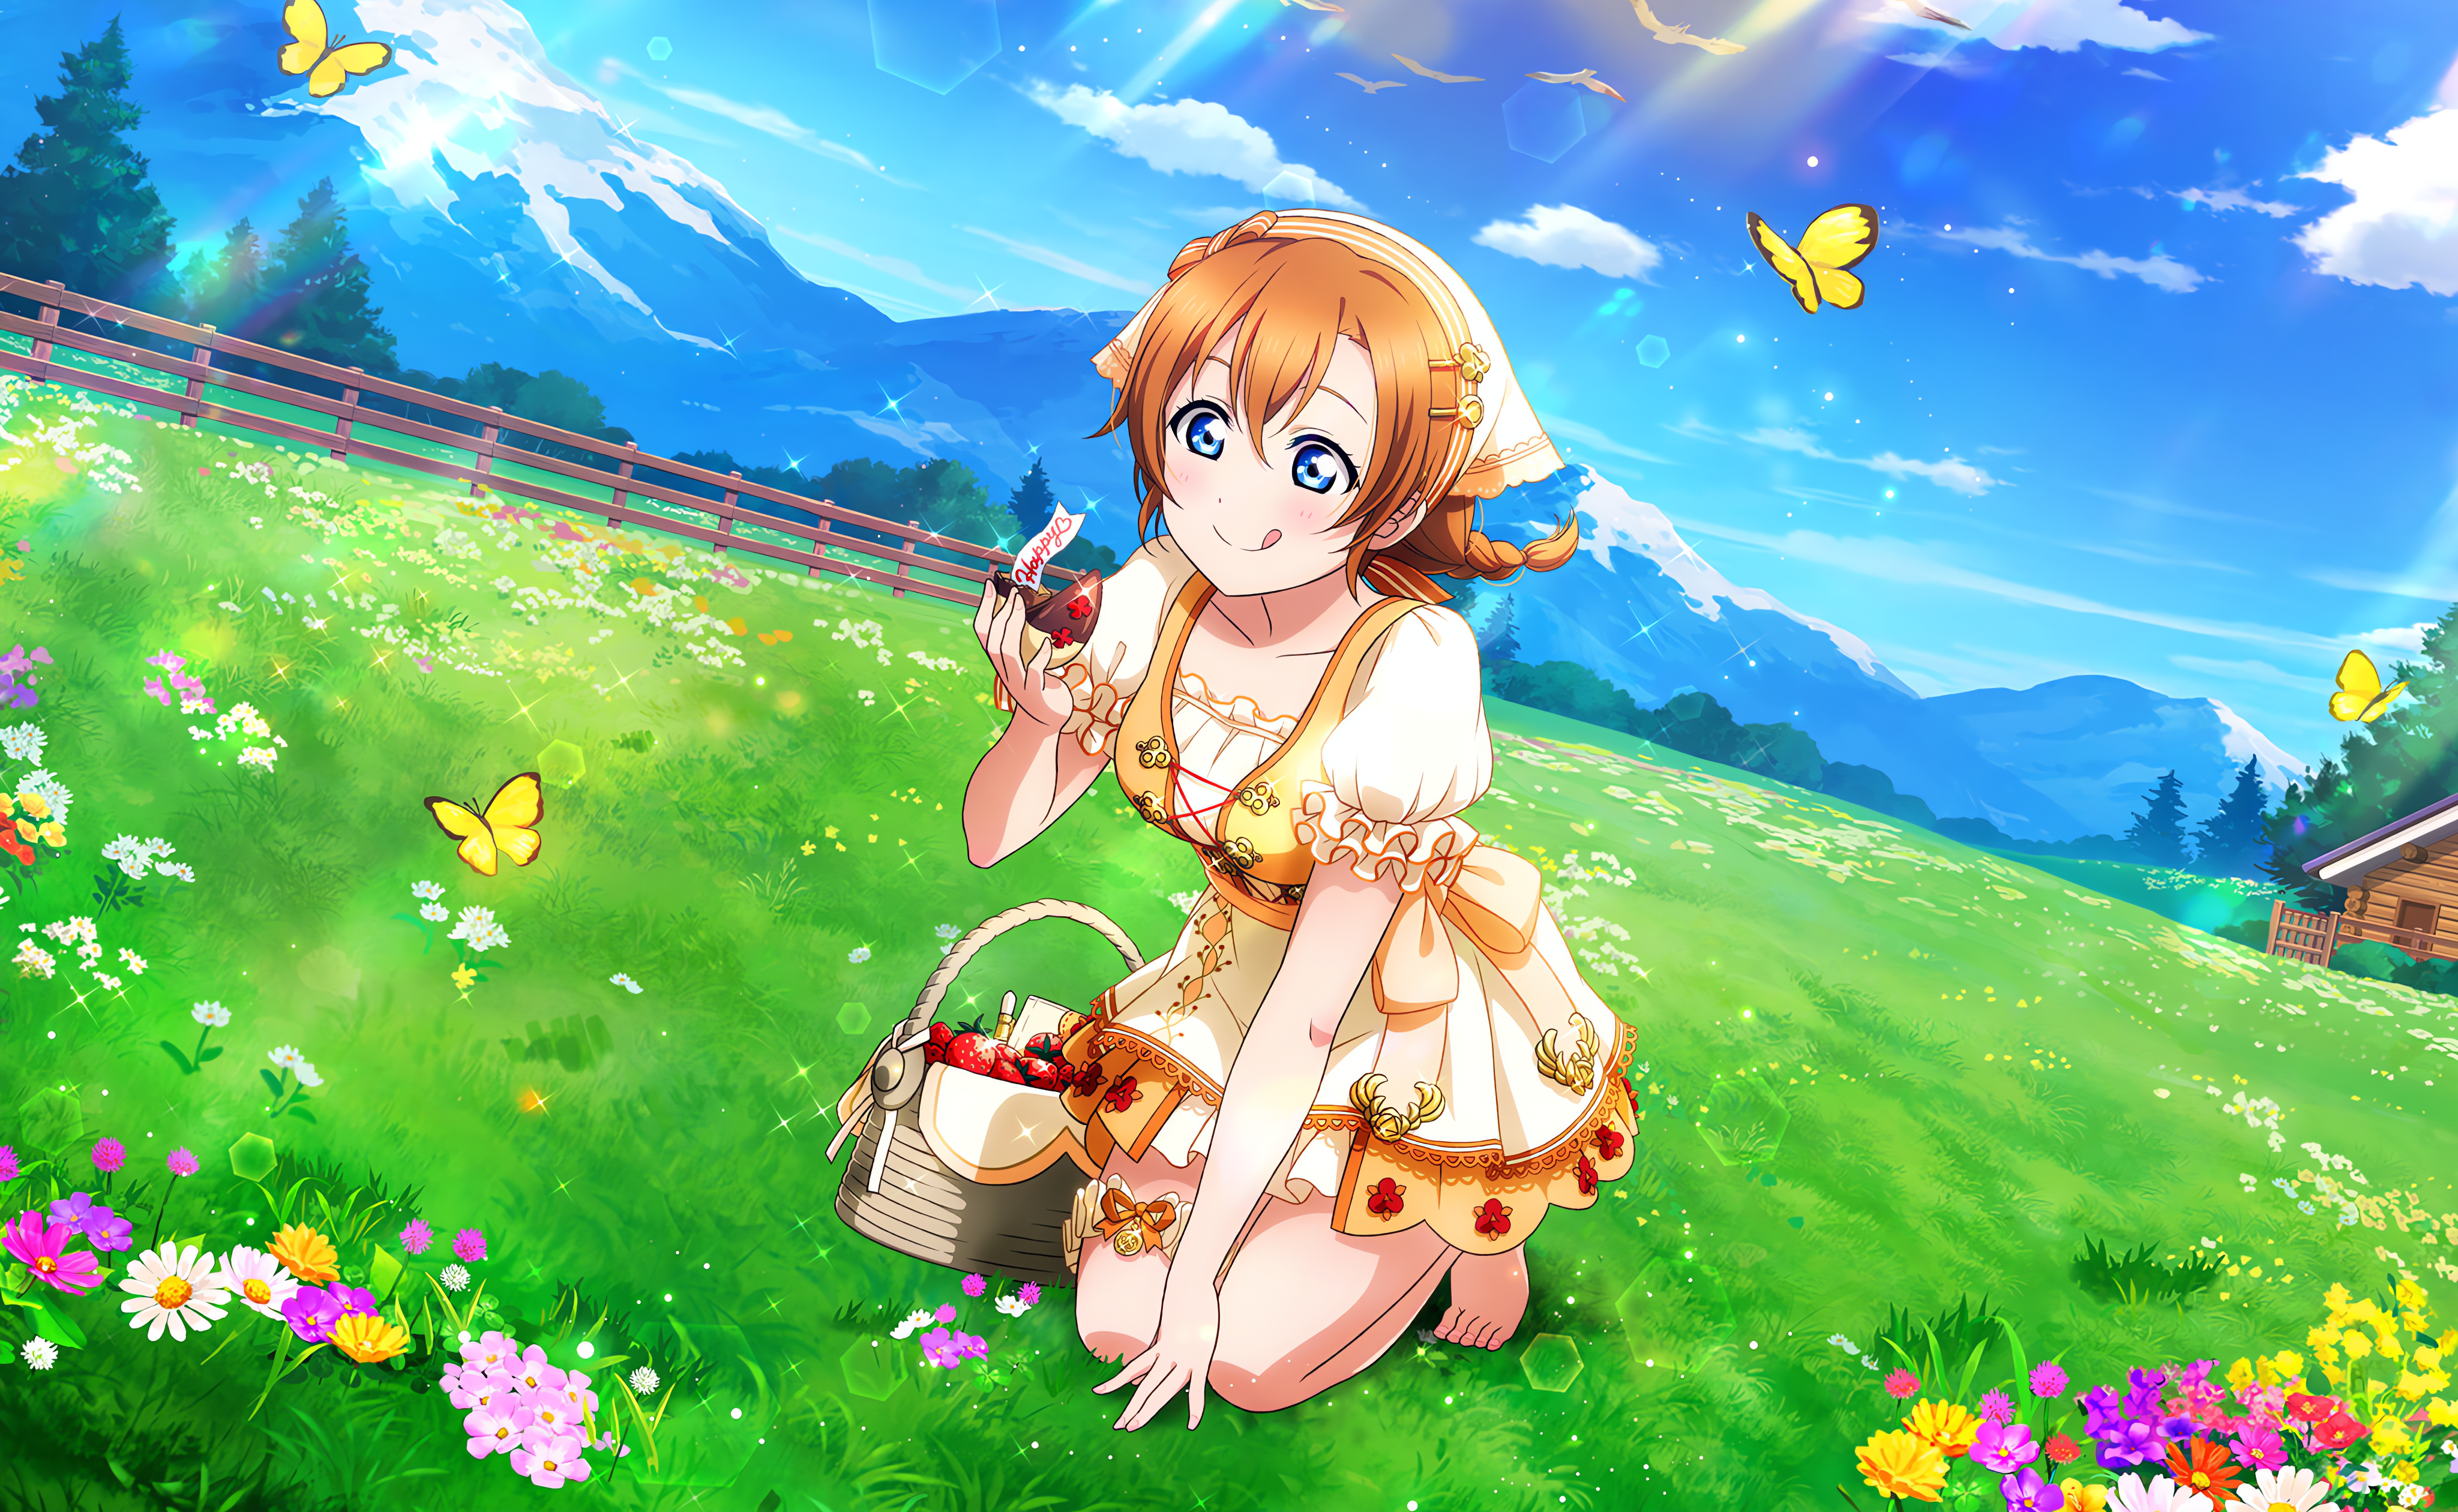 Anime 4096x2520 Kousaka Honoka Love Live! anime anime girls smiling tongue out grass flowers sunlight sky clouds mountains snow strawberries fruit butterfly insect trees dress leaves